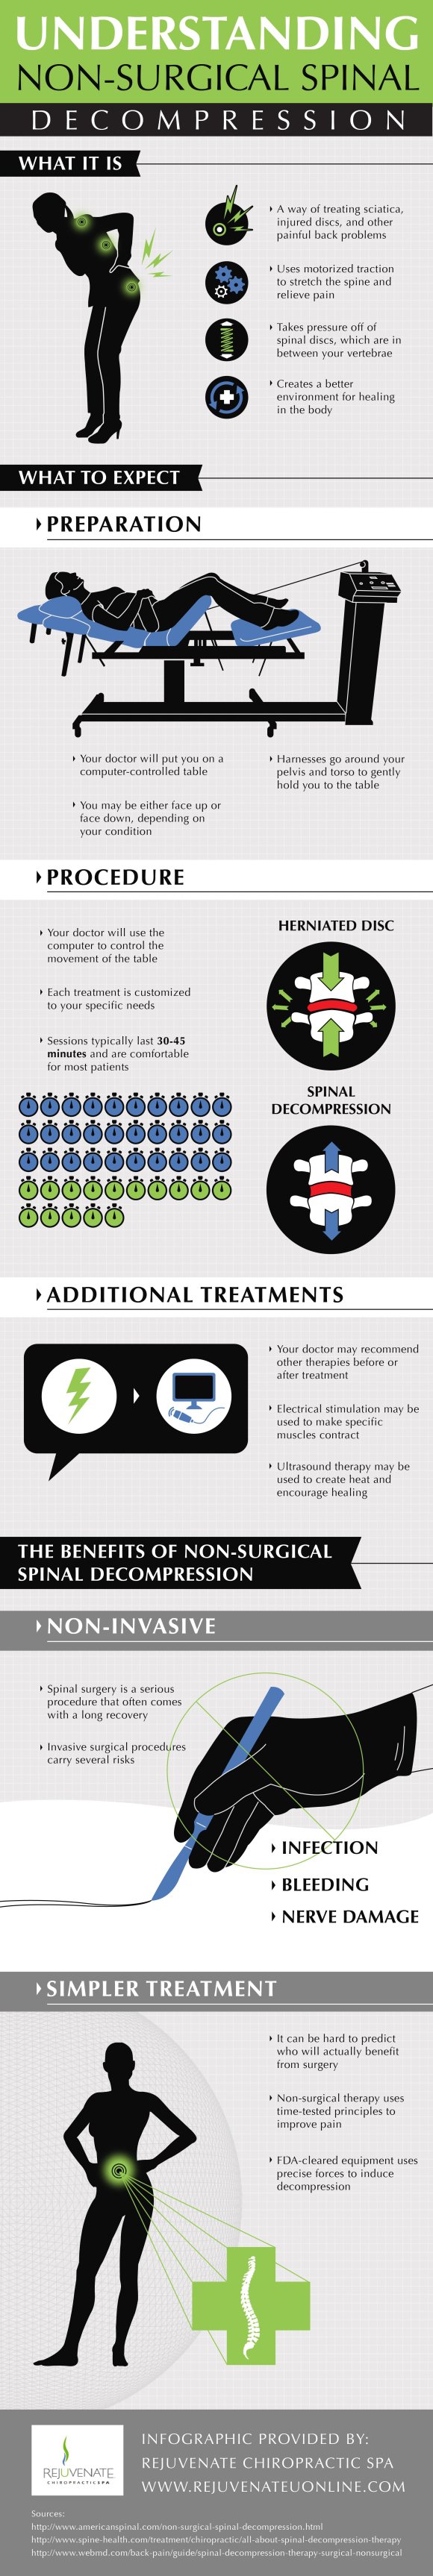 Understanding non surgical spinal decompression